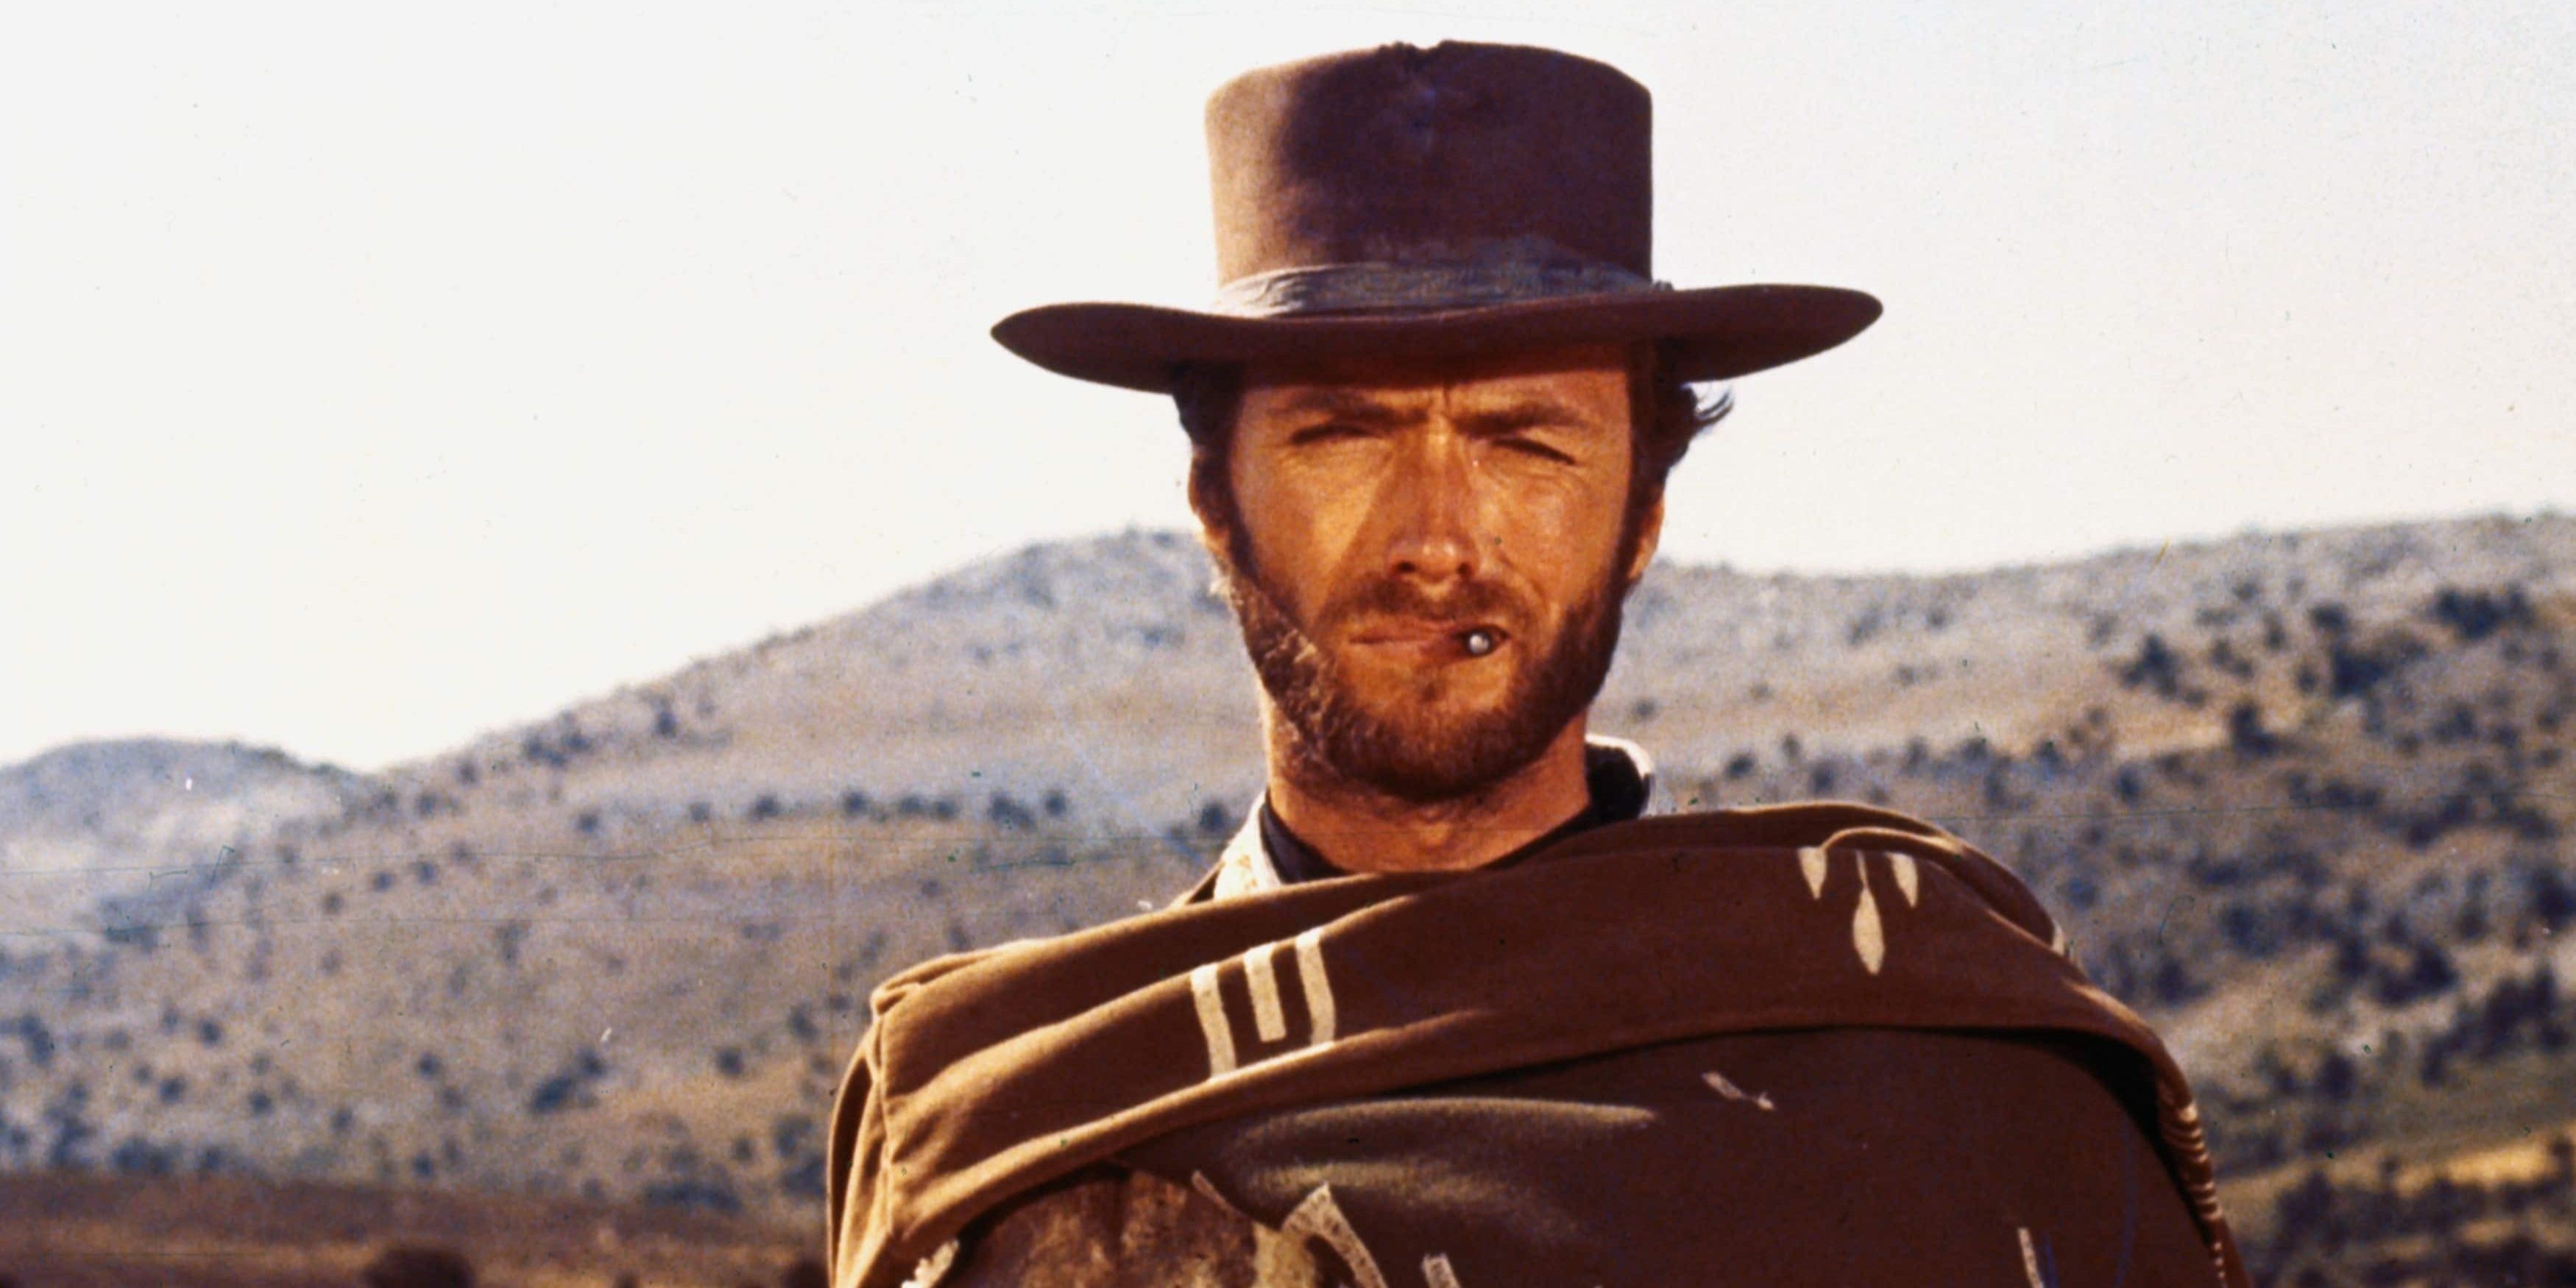 The-good-the-bad-and-the-ugly-Clint-Eastwood.jpg